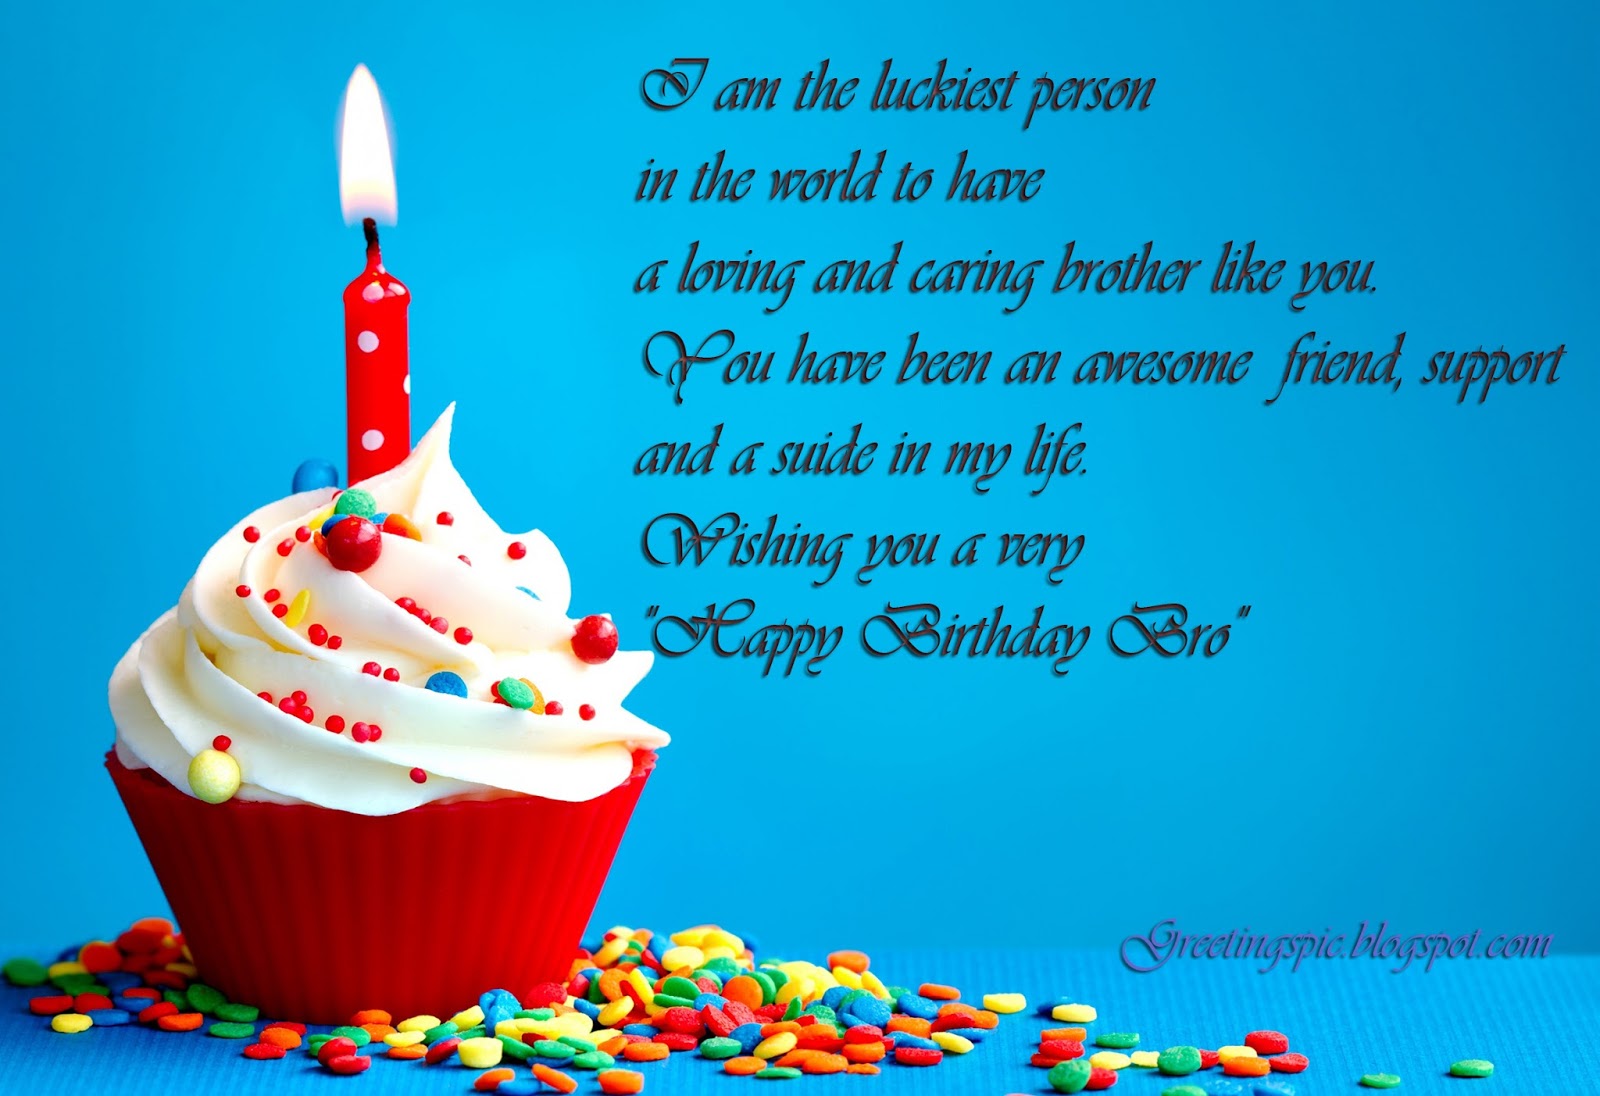 Birthday wishes quotes for brother with images ~ Greetings Wishes Images